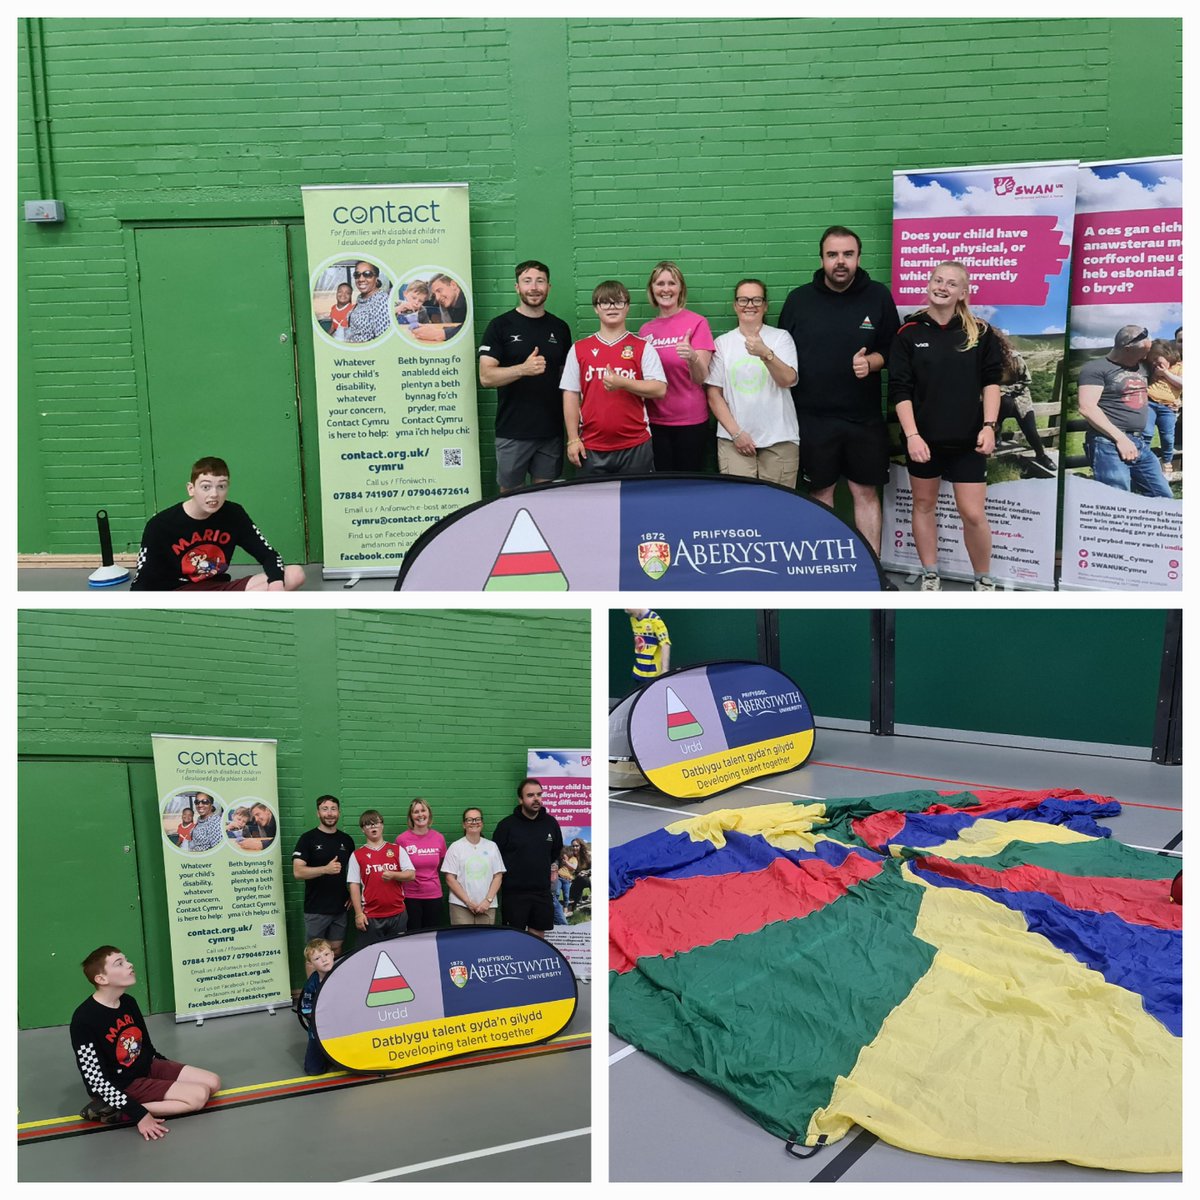 We had lots of fun on our first day of Better Together Through Sport project with @contactfamilies and @Urdd @chwaraeonyrurdd today at Deeside Leisure Centre #undiagnosed #rarecommunity #disabilitysport #inclusive